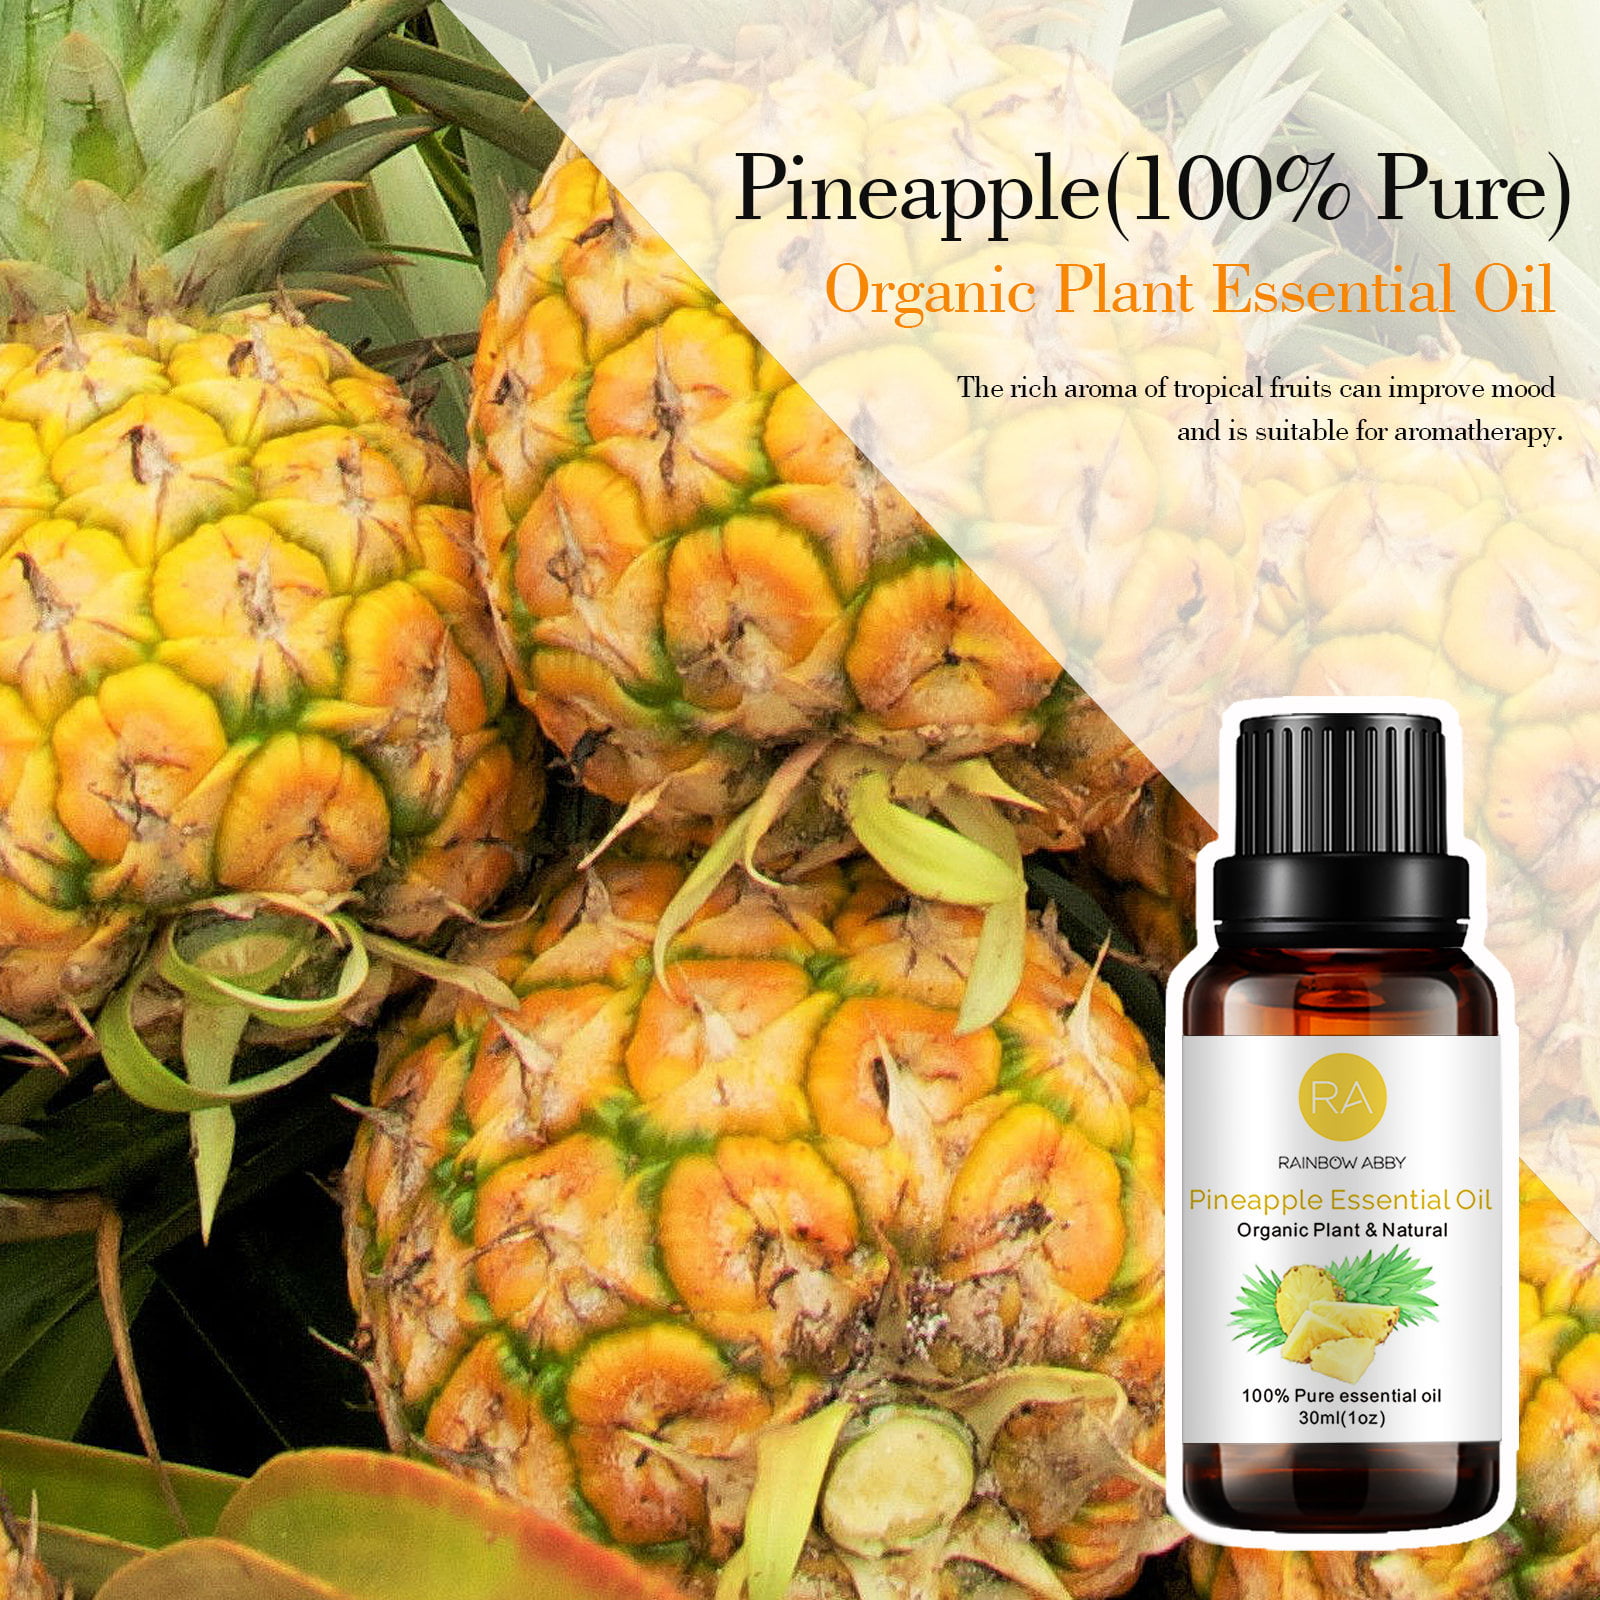 2-Pack Pineapple Essential Oil - 100% Pure Organic Natural Plant (Ananas  comosus) Pineapple Oil for Diffuser, Aroma, Spa, Massage, Yoga, Perfume,  Body